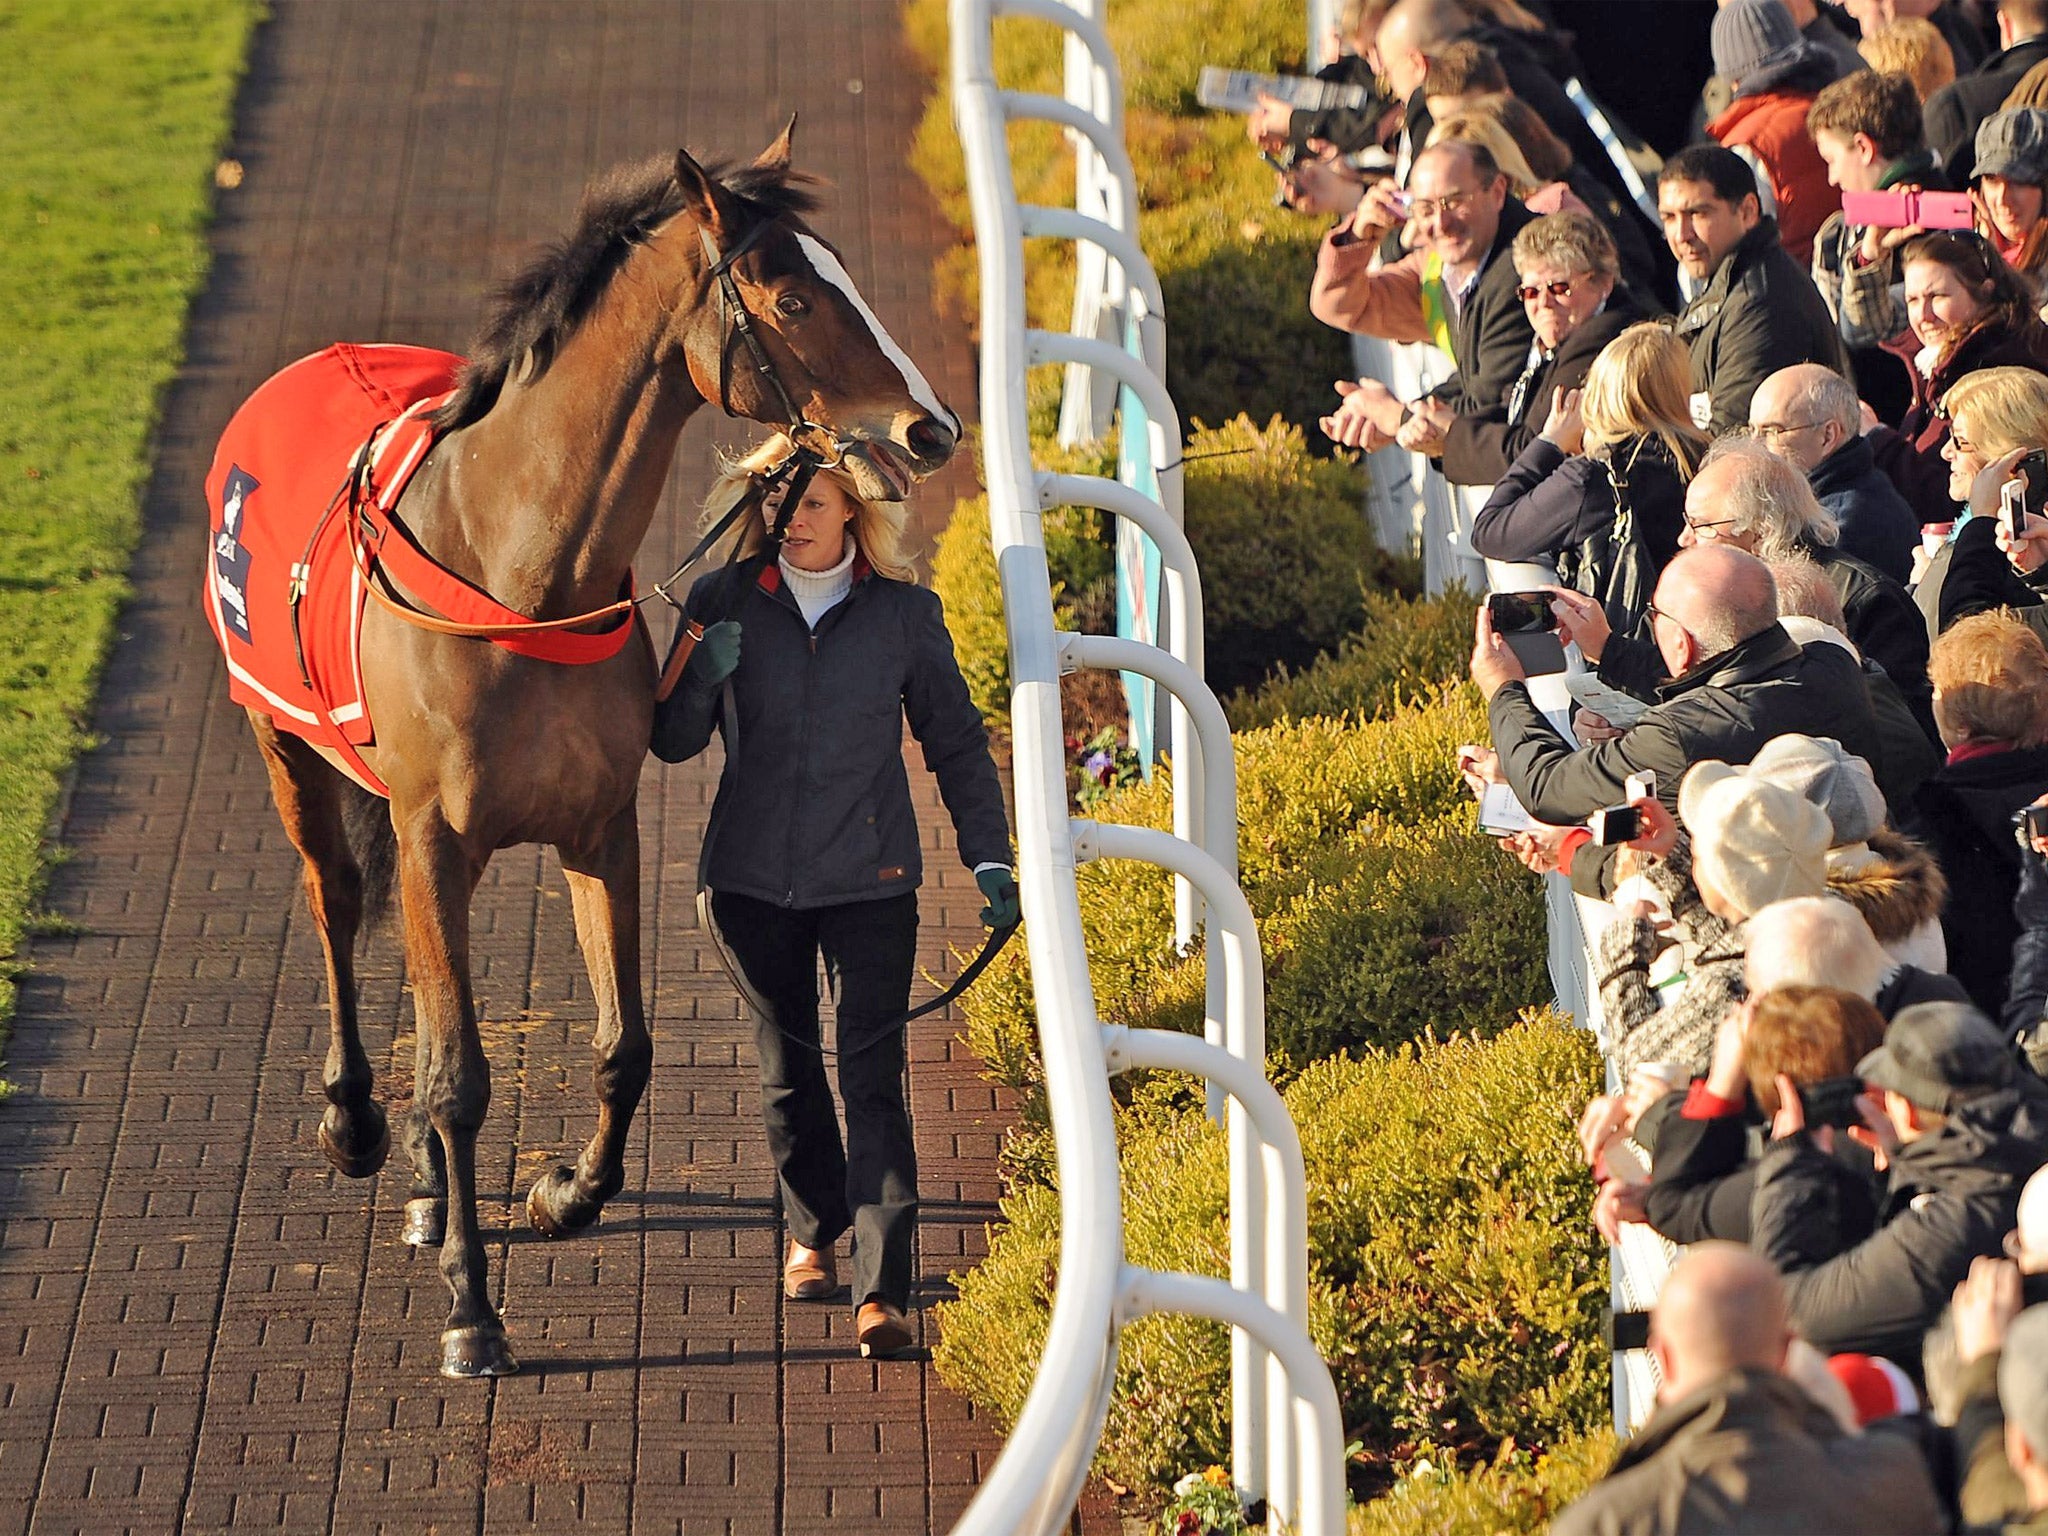 Kauto Star parades at Sandown last Saturday. The atmosphere at Kempton on Boxing Day may be strained